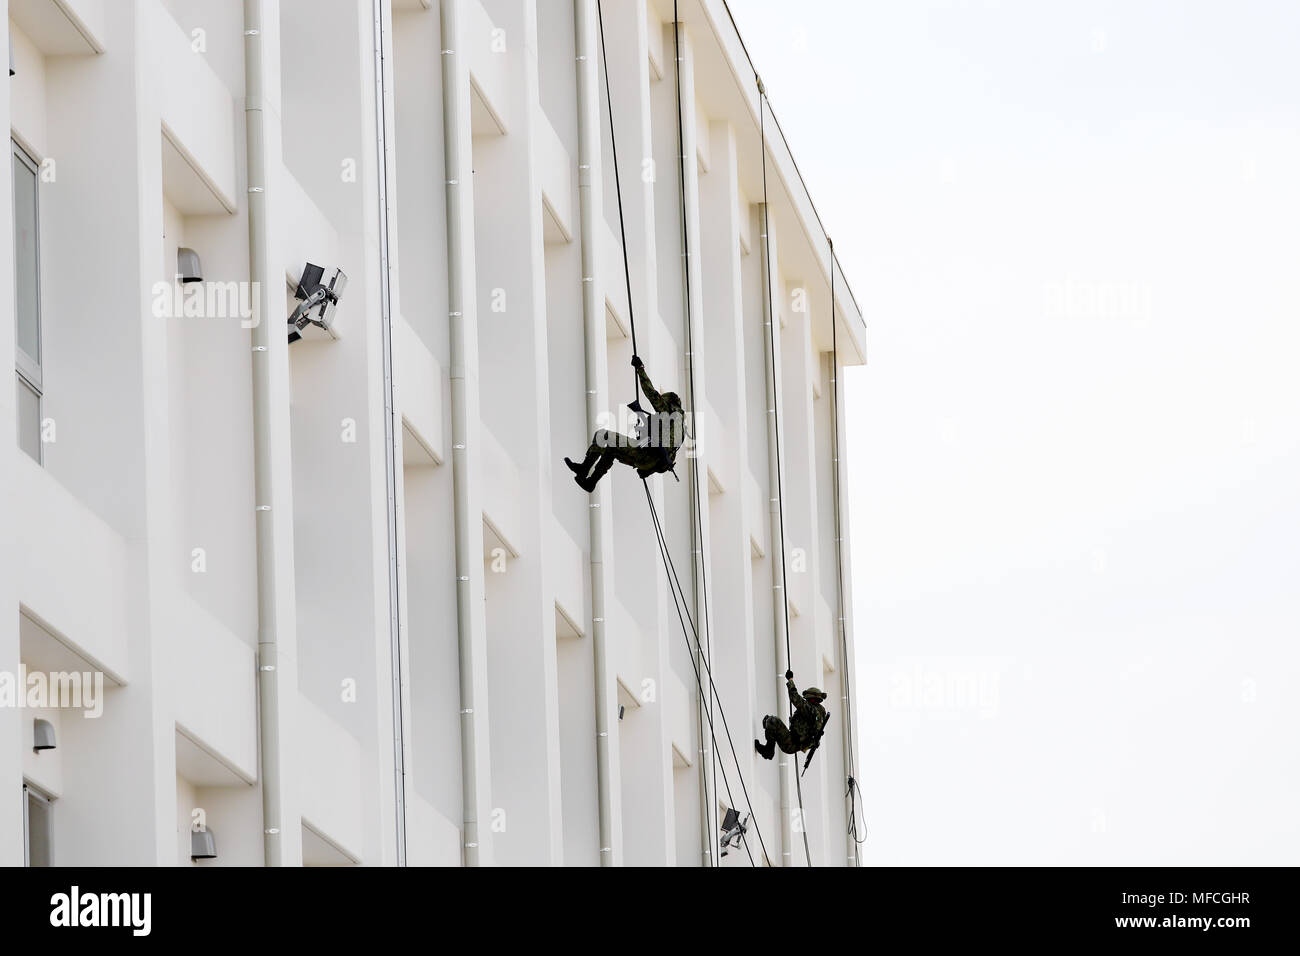 Japanese military men rappelling down the rope from building Stock Photo